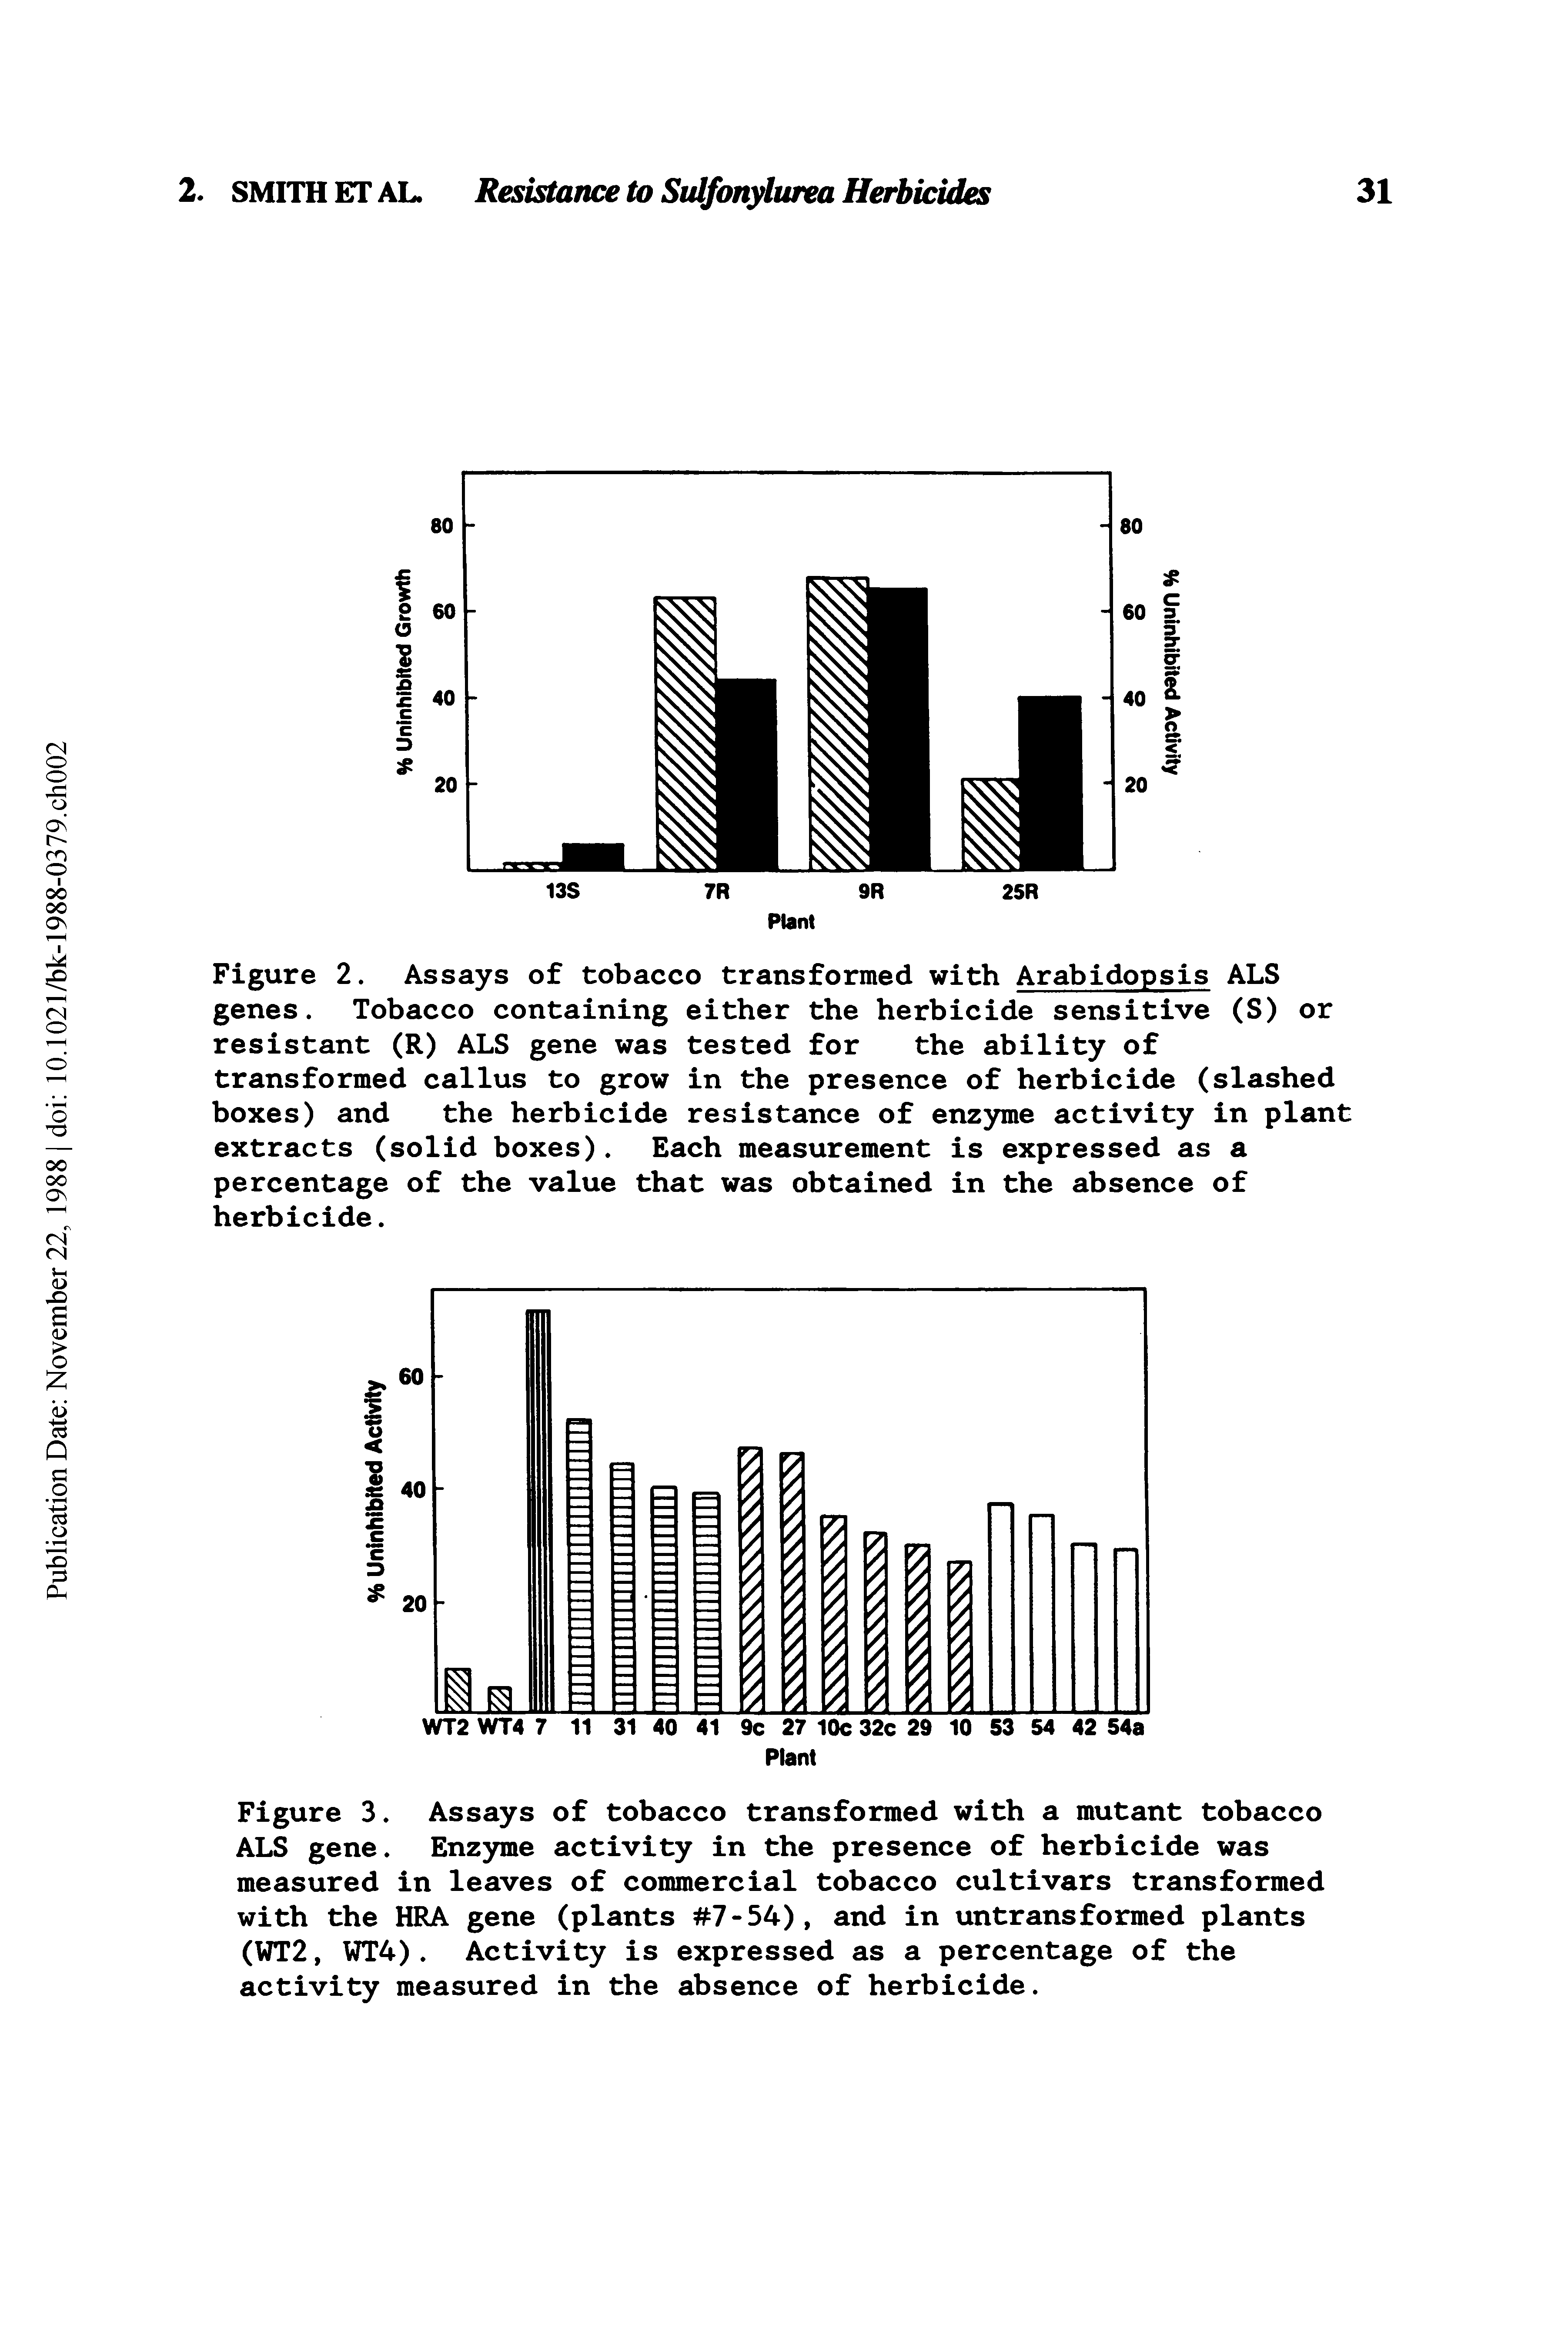 Figure 3. Assays of tobacco transformed with a mutant tobacco ALS gene. Enzyme activity in the presence of herbicide was measured in leaves of commercial tobacco cultivars transformed with the HRA gene (plants 7-54), and in untransformed plants (WT2, WT4). Activity is expressed as a percentage of the activity measured in the absence of herbicide.